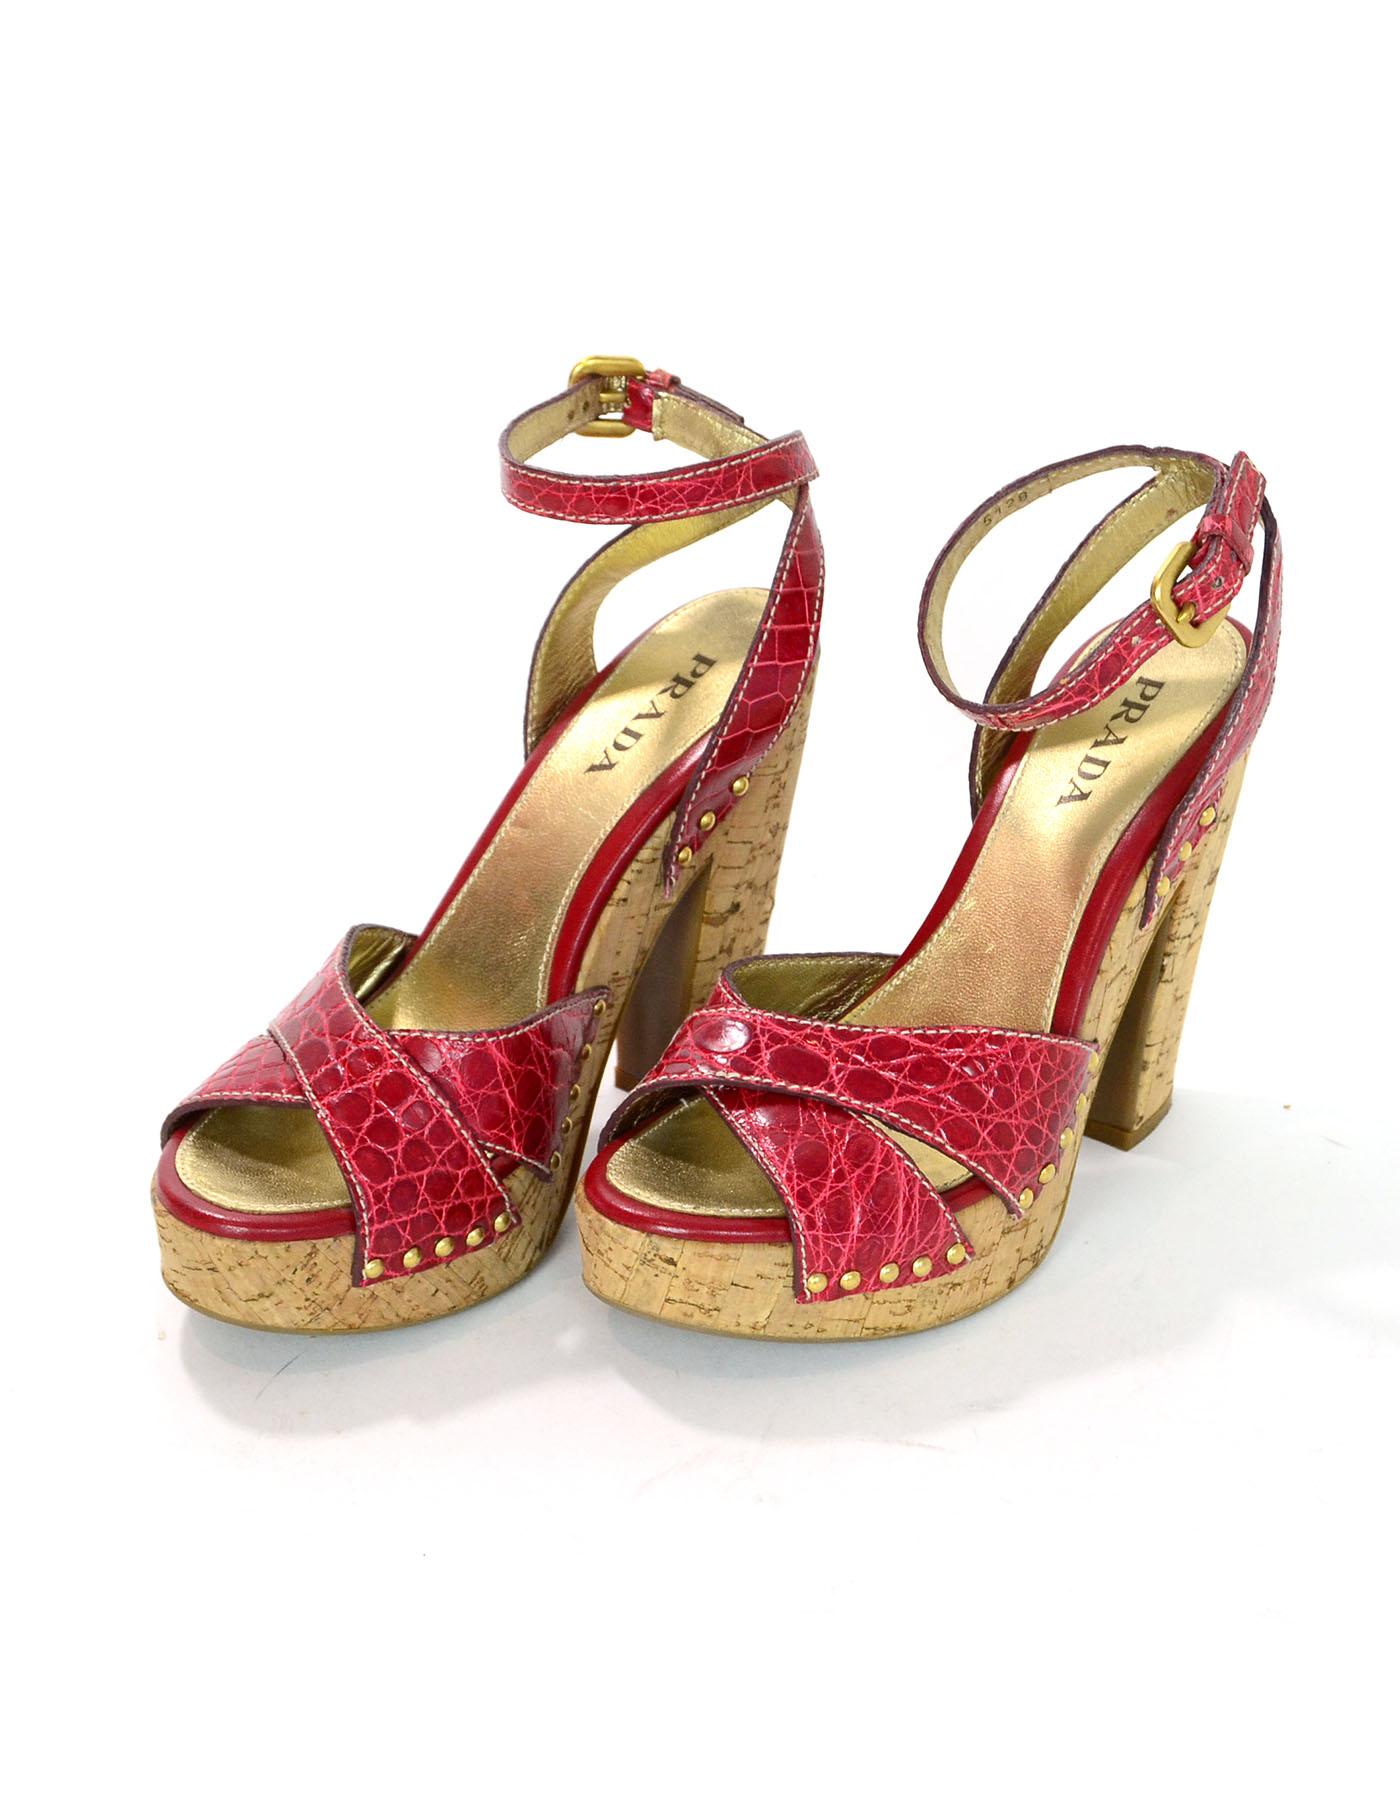 Prada Red Crocodile & Cork Sandals Sz 37

Made In: Italy
Color: Red
Materials: Leather, cork
Closure/Opening: Buckle closure at ankle
Sole Stamp: Prada 37 Made in Italy
Overall Condition: Excellent pre-owned condition with the exception of some wear